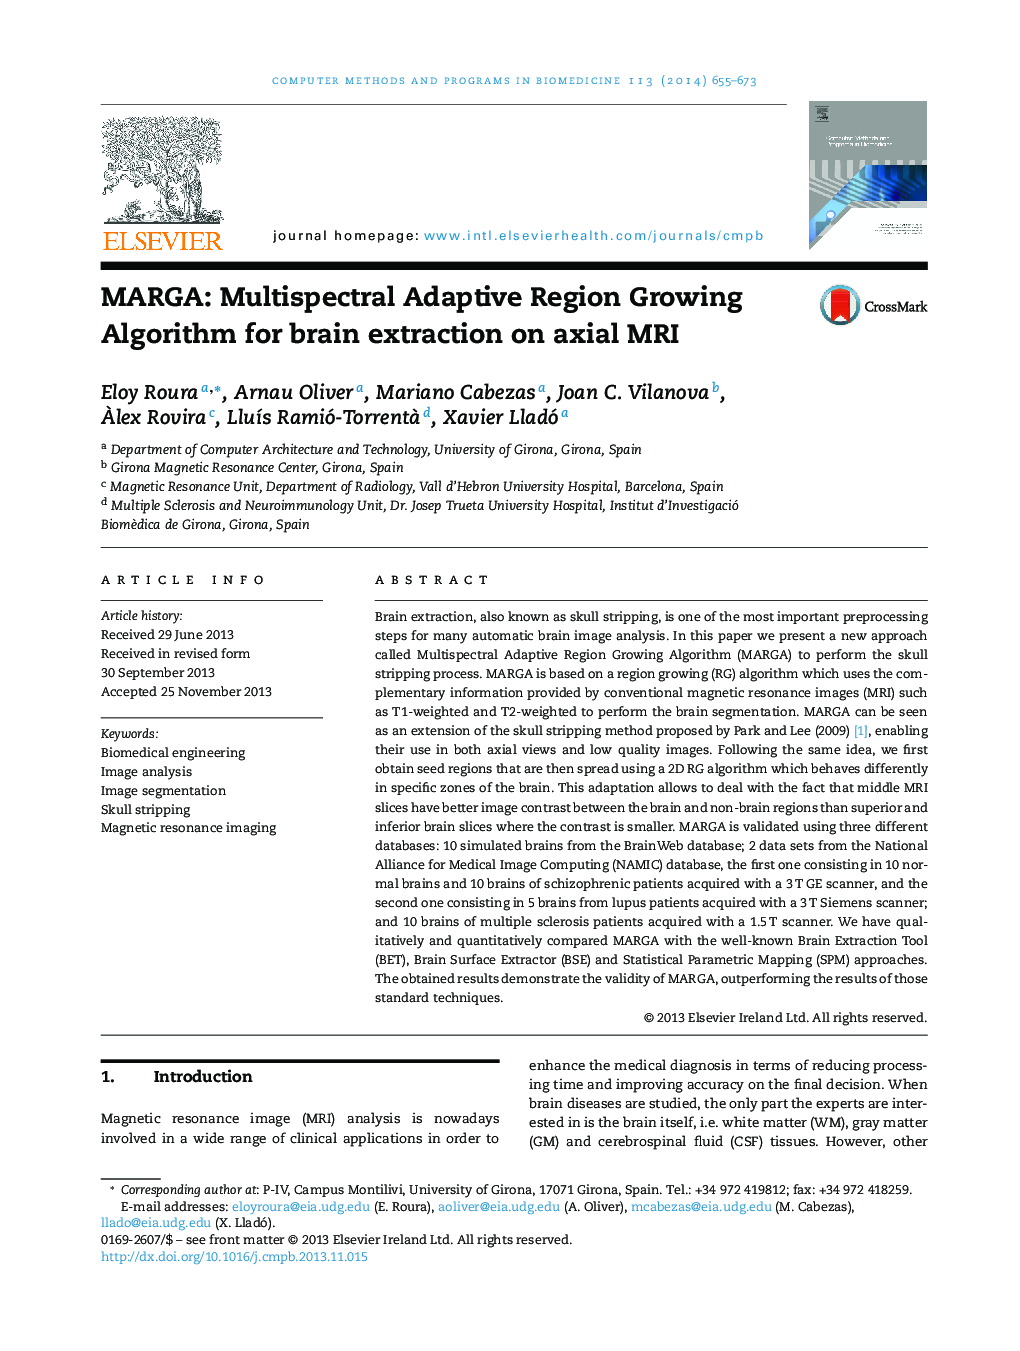 MARGA: Multispectral Adaptive Region Growing Algorithm for brain extraction on axial MRI